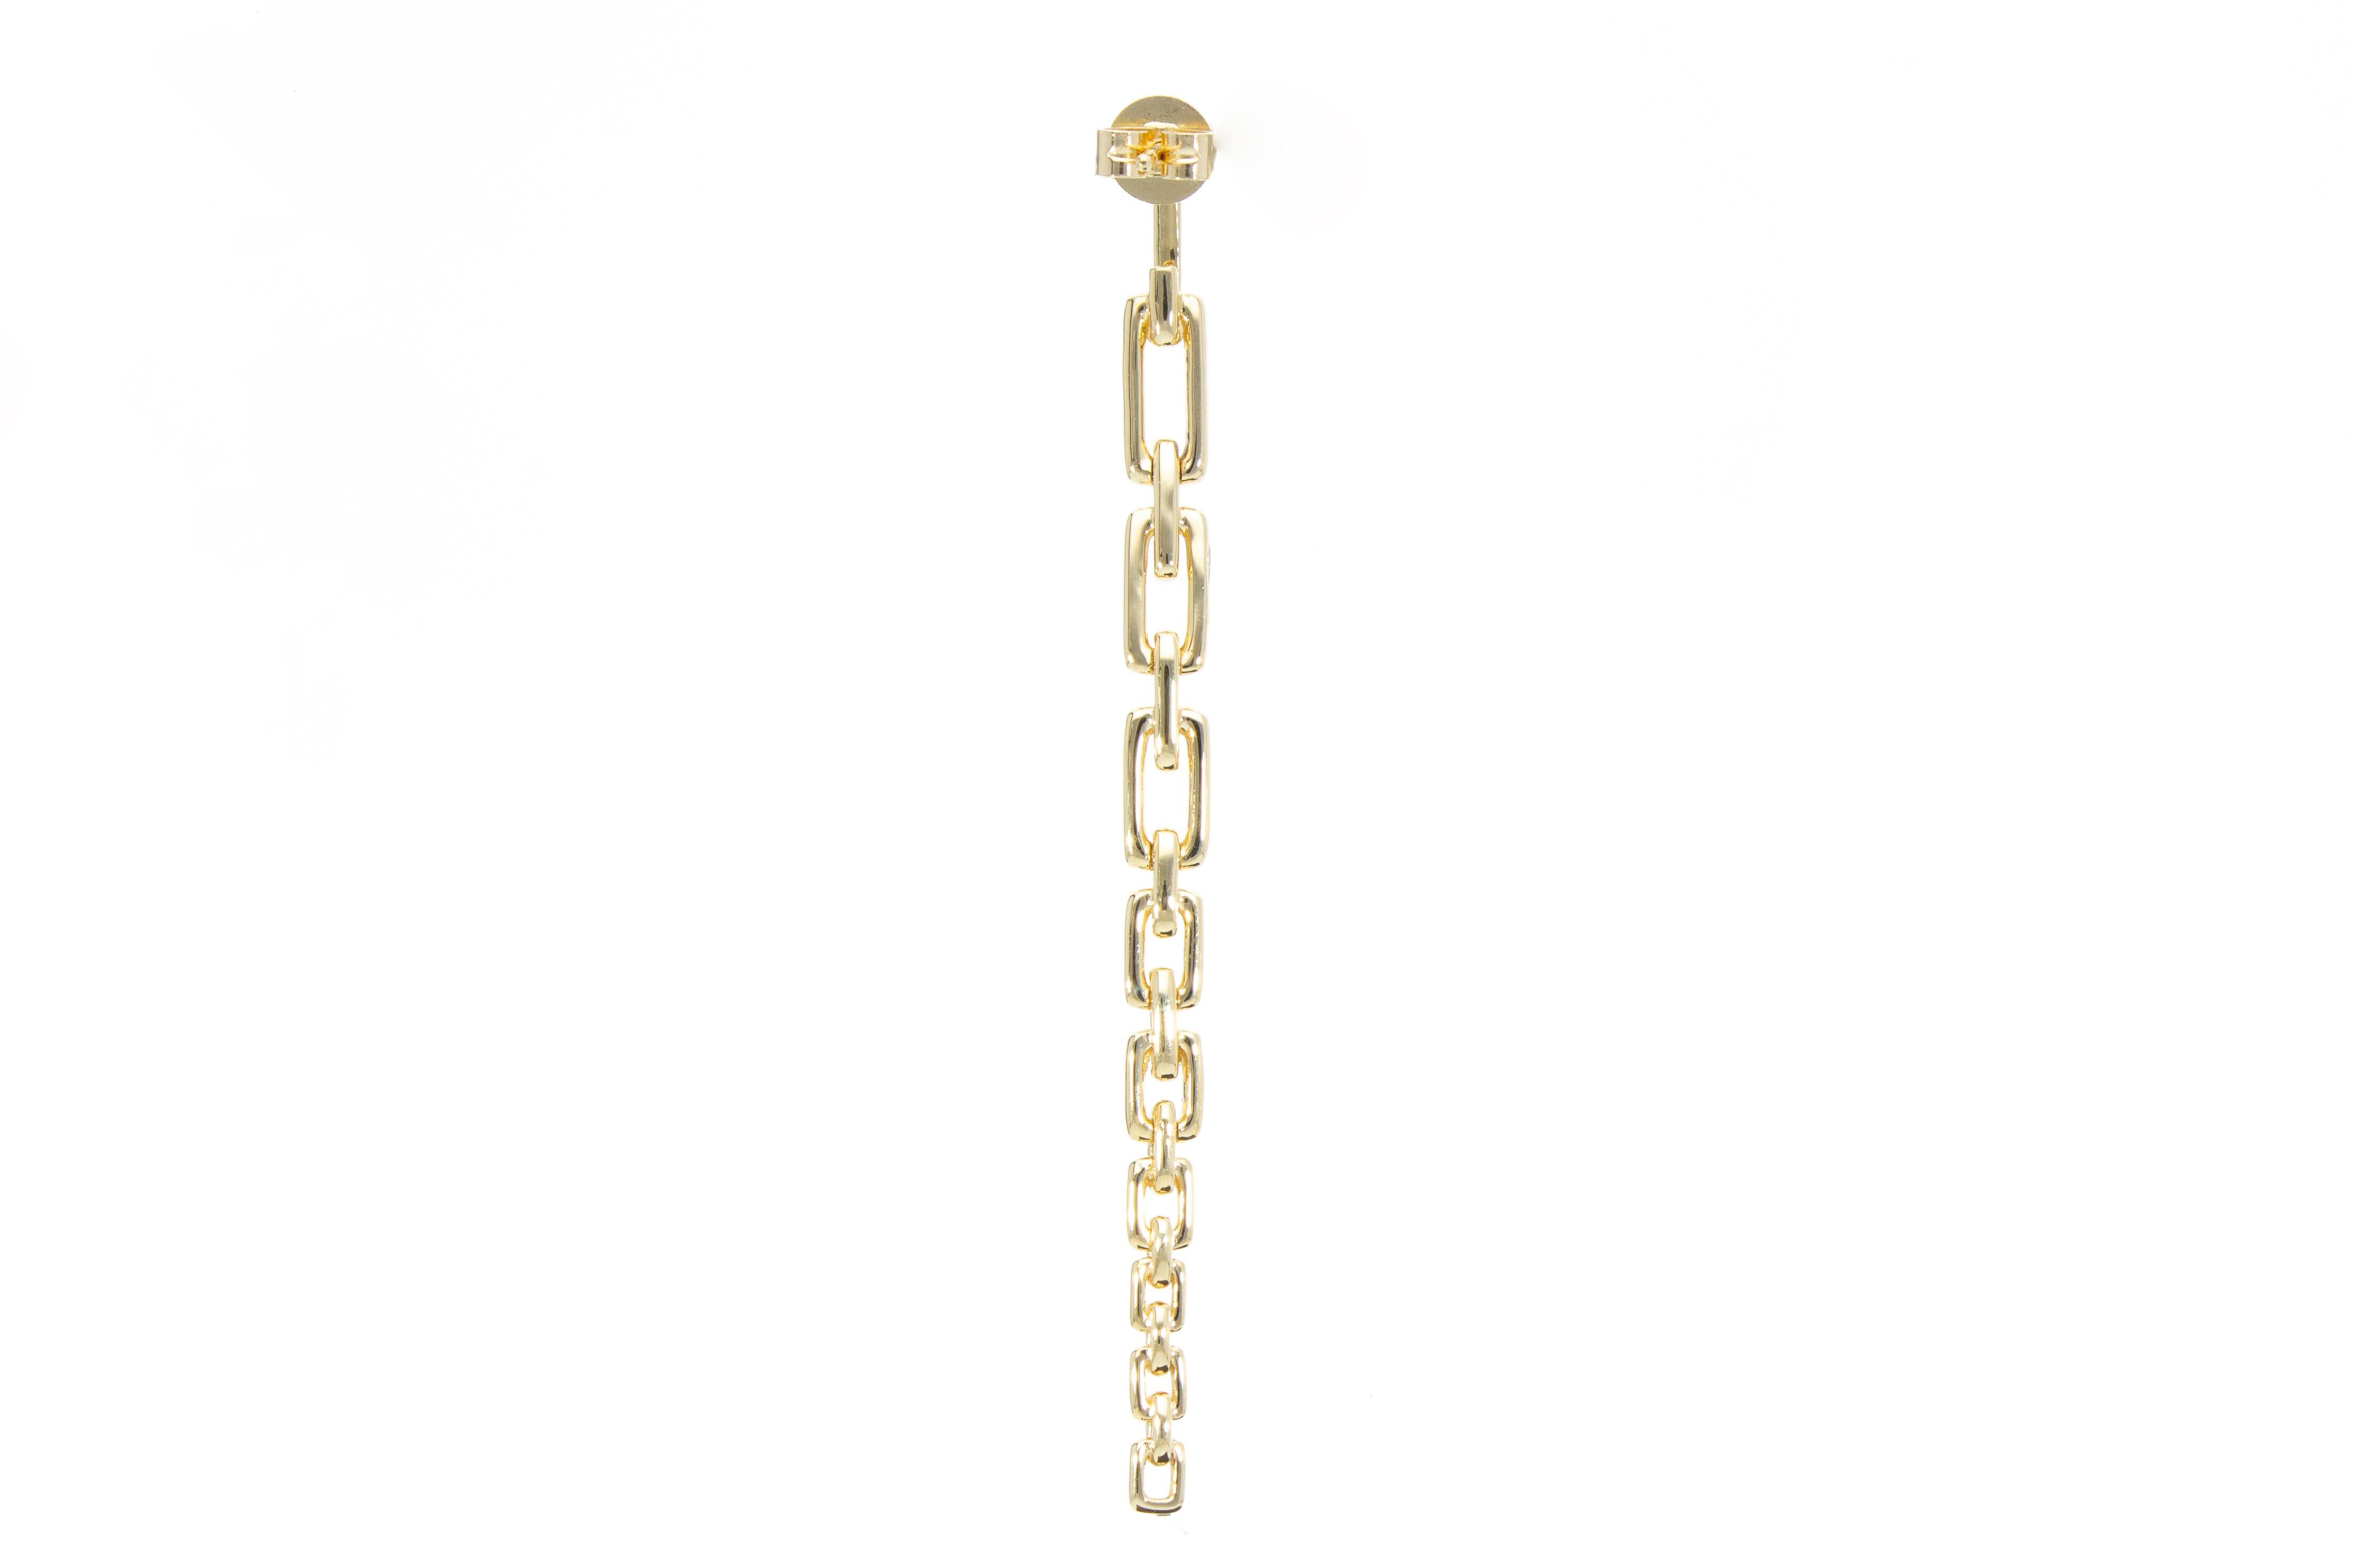 Diamonds Ct 0.35 Pendant Earrings with Rectangular Links 18k Gold Made in Italy For Sale 6